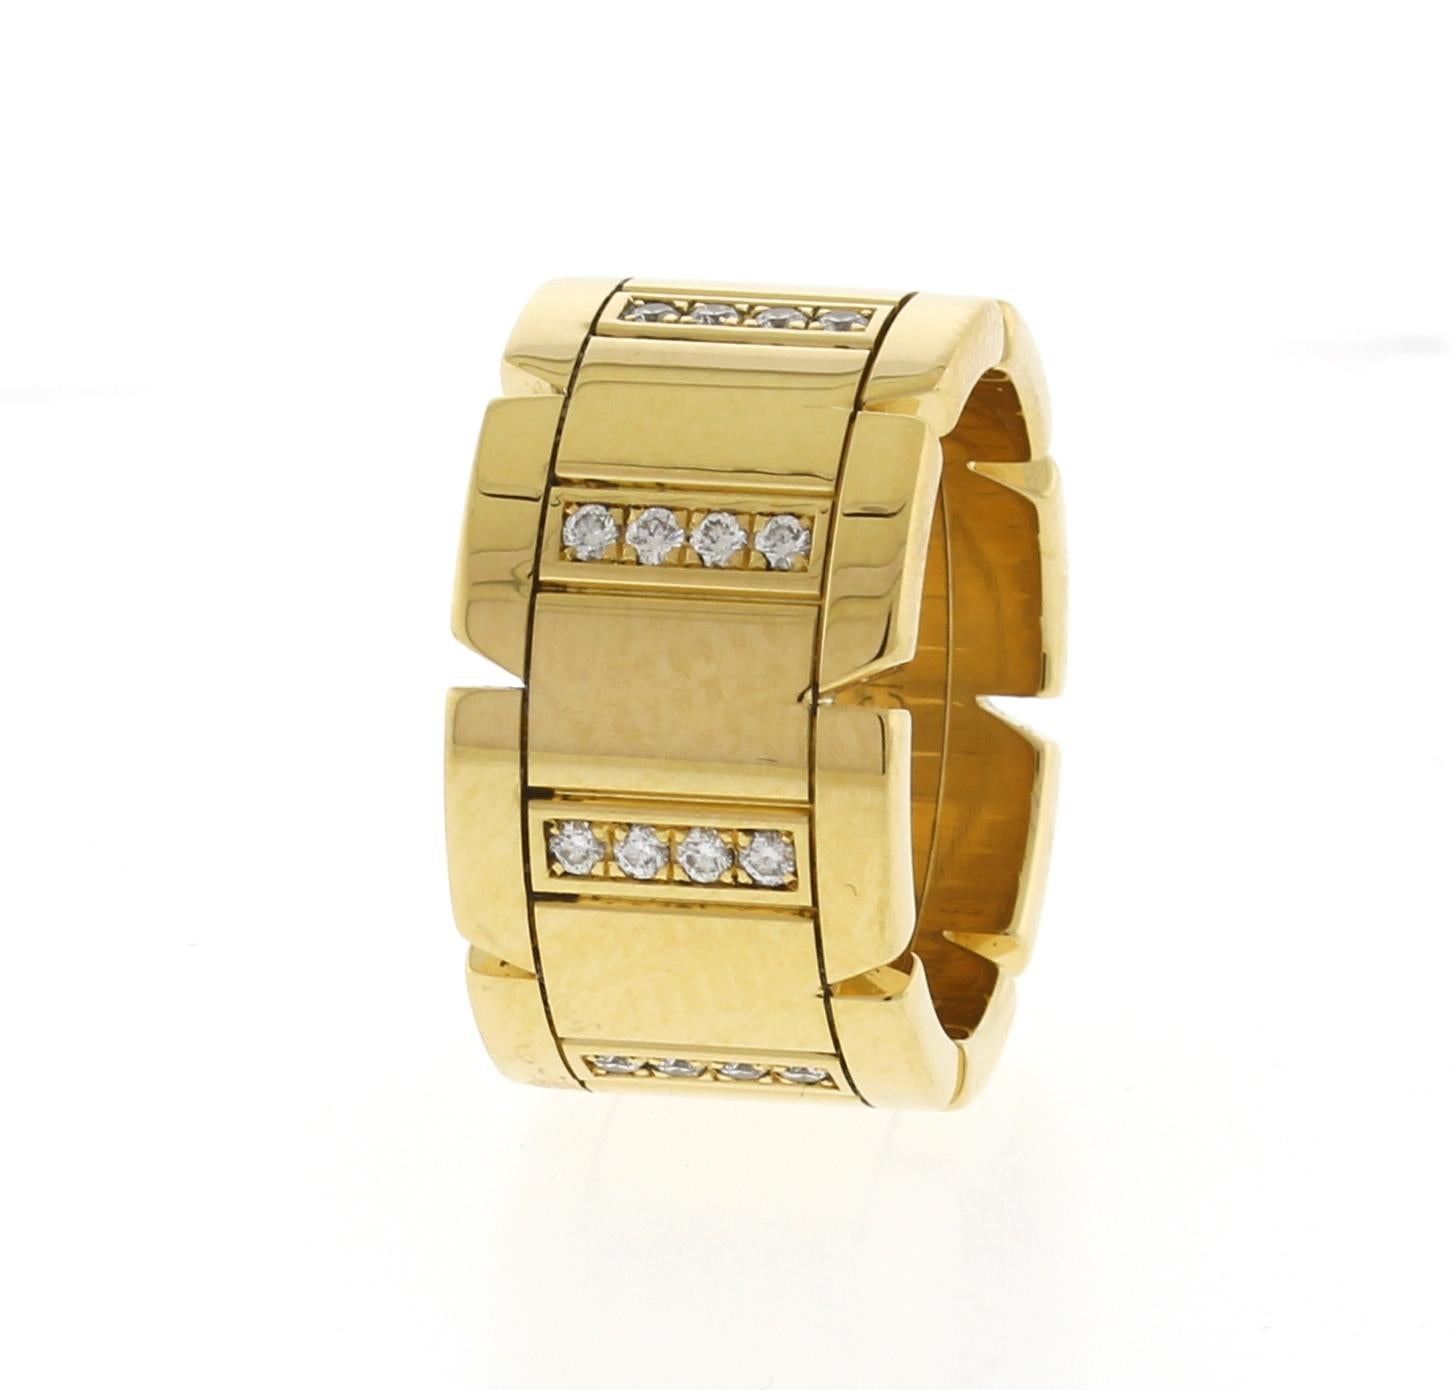 This iconic ring from Cartier's Tank Francaise collection is crafted in 18k yellow gold and set with 32 brilliant-cut round diamonds all the wat around totaling in 0.40 carats.   Made in France. 
Excellent pre-owned condition.
Thickness: